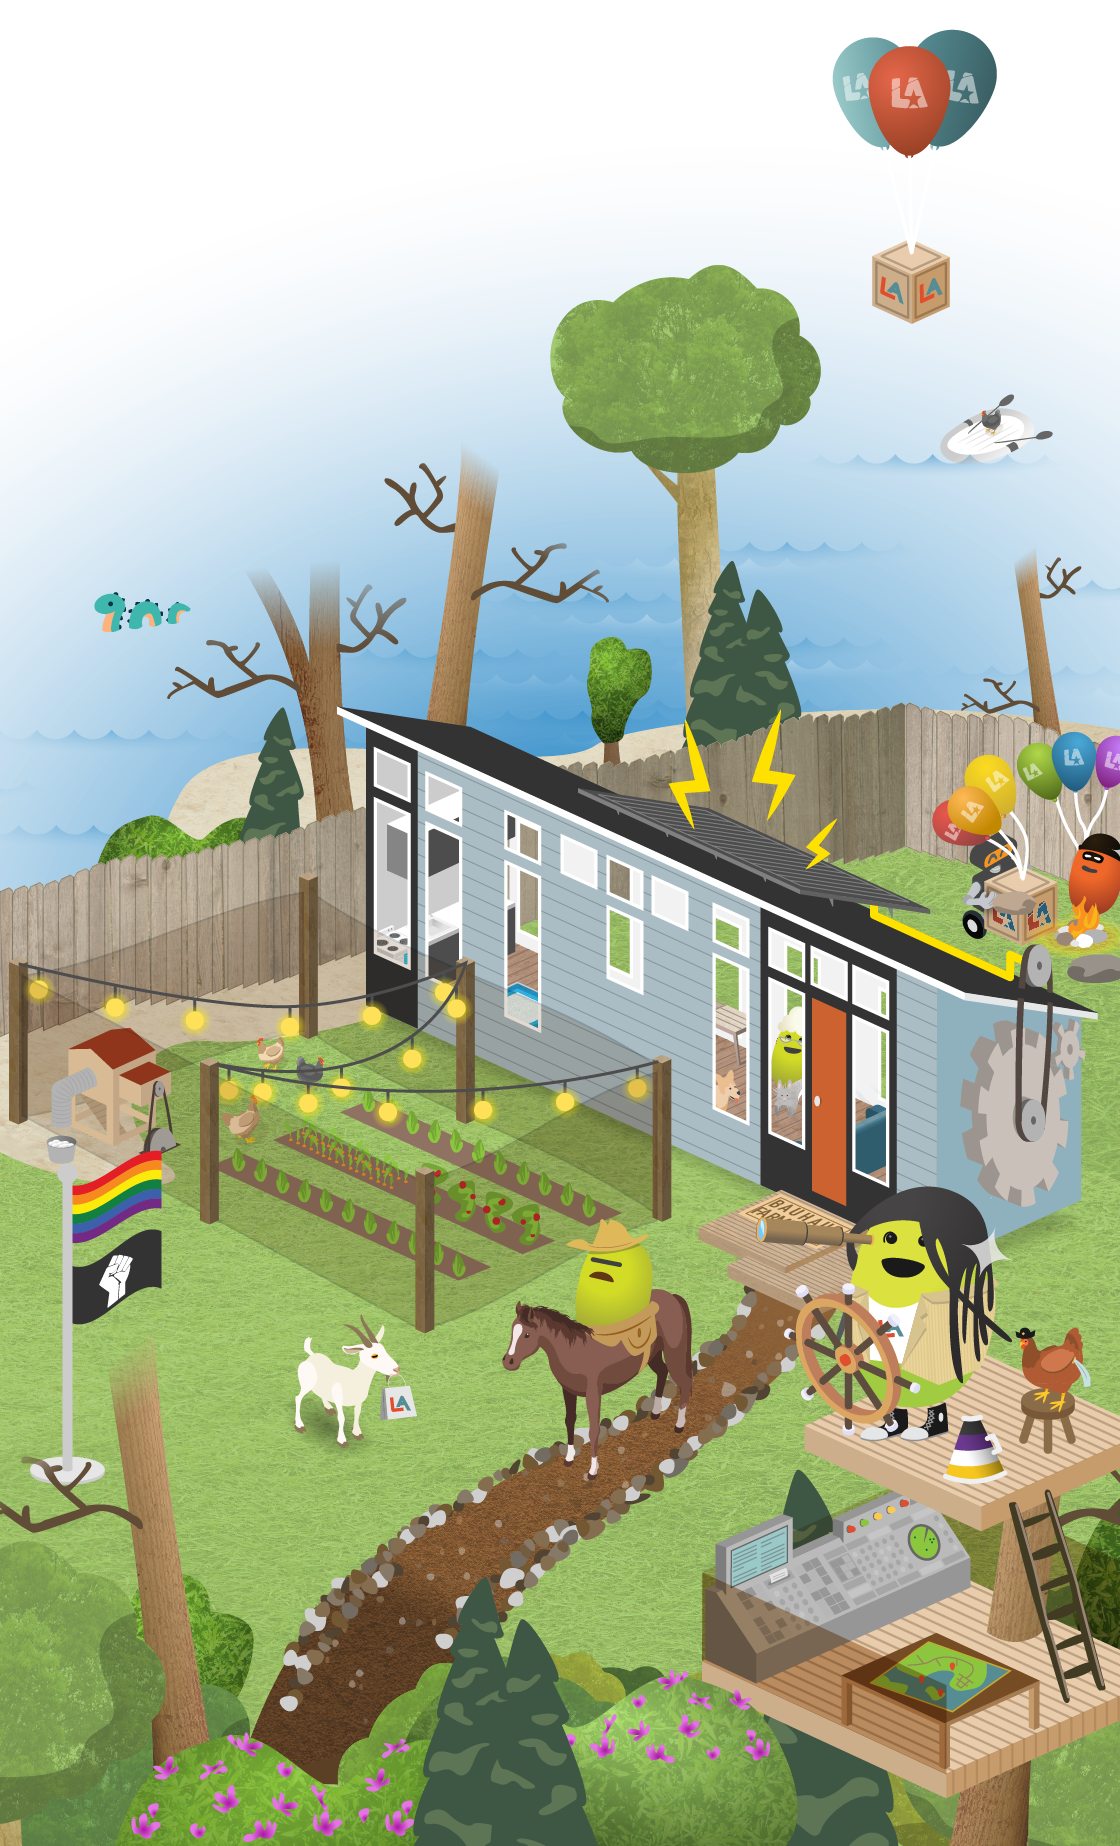 A complex isometric graphic of a farmhouse overlooking the sea. There is a garden, animals like a goat, horse, and chickens. In front of the house is a garden with string lights hung above it. In the backyard a robot carries a box with the Libral Arts logo on it and three balloons tied to the top. In the foreground, Lou is perched atop a treehouse with spyglass and ship's steering wheel. A bank of computers and a map are on the treehouse's level below.